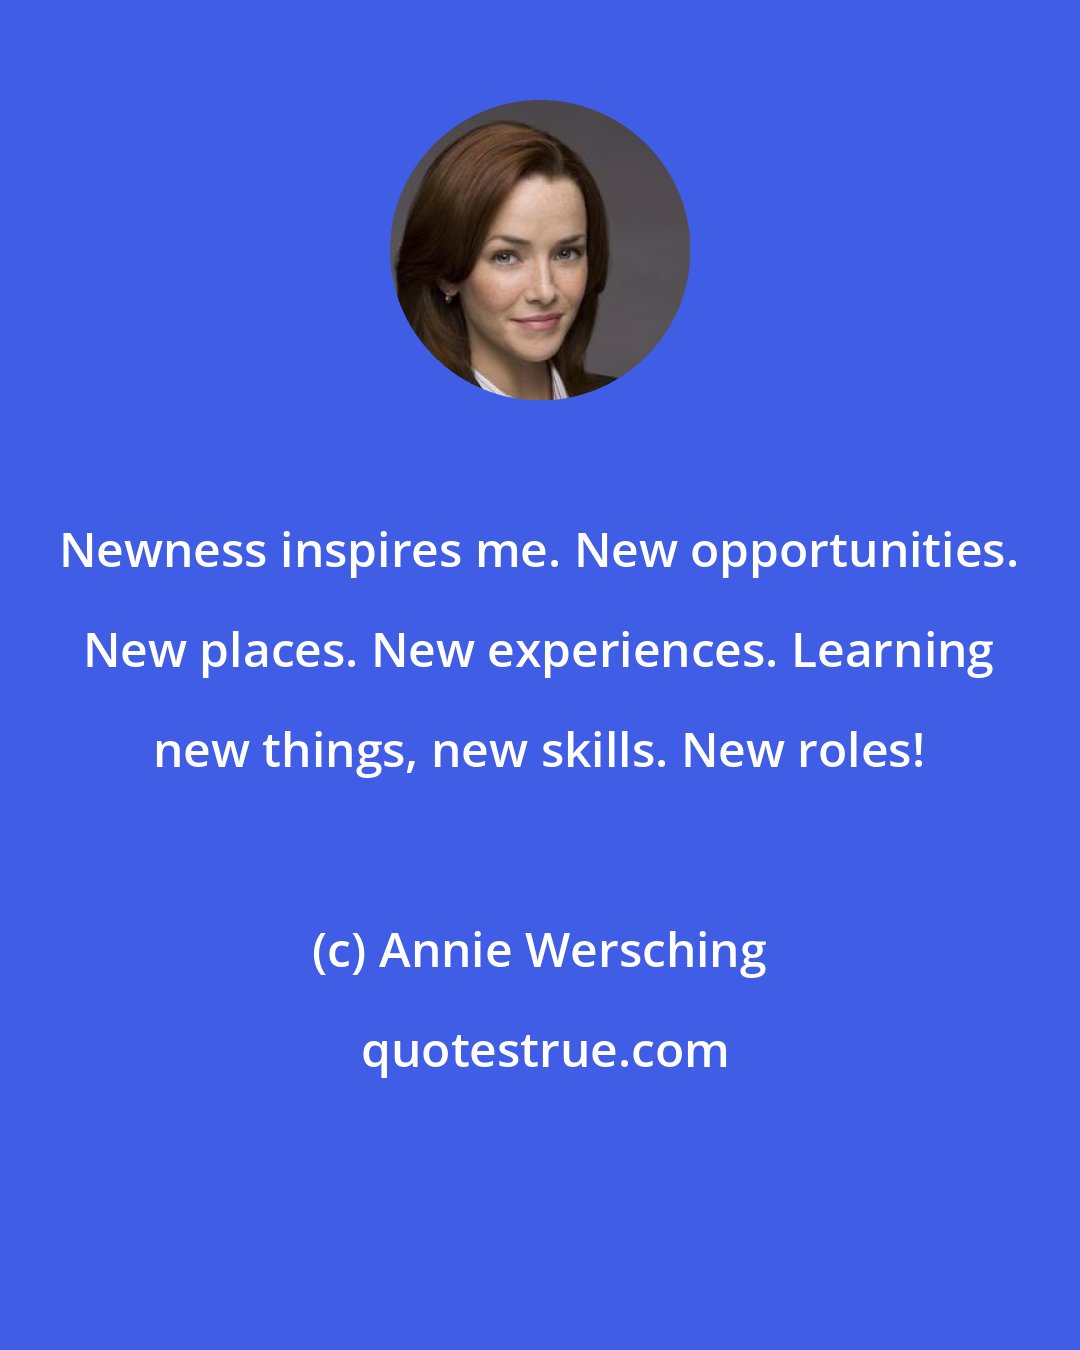 Annie Wersching: Newness inspires me. New opportunities. New places. New experiences. Learning new things, new skills. New roles!